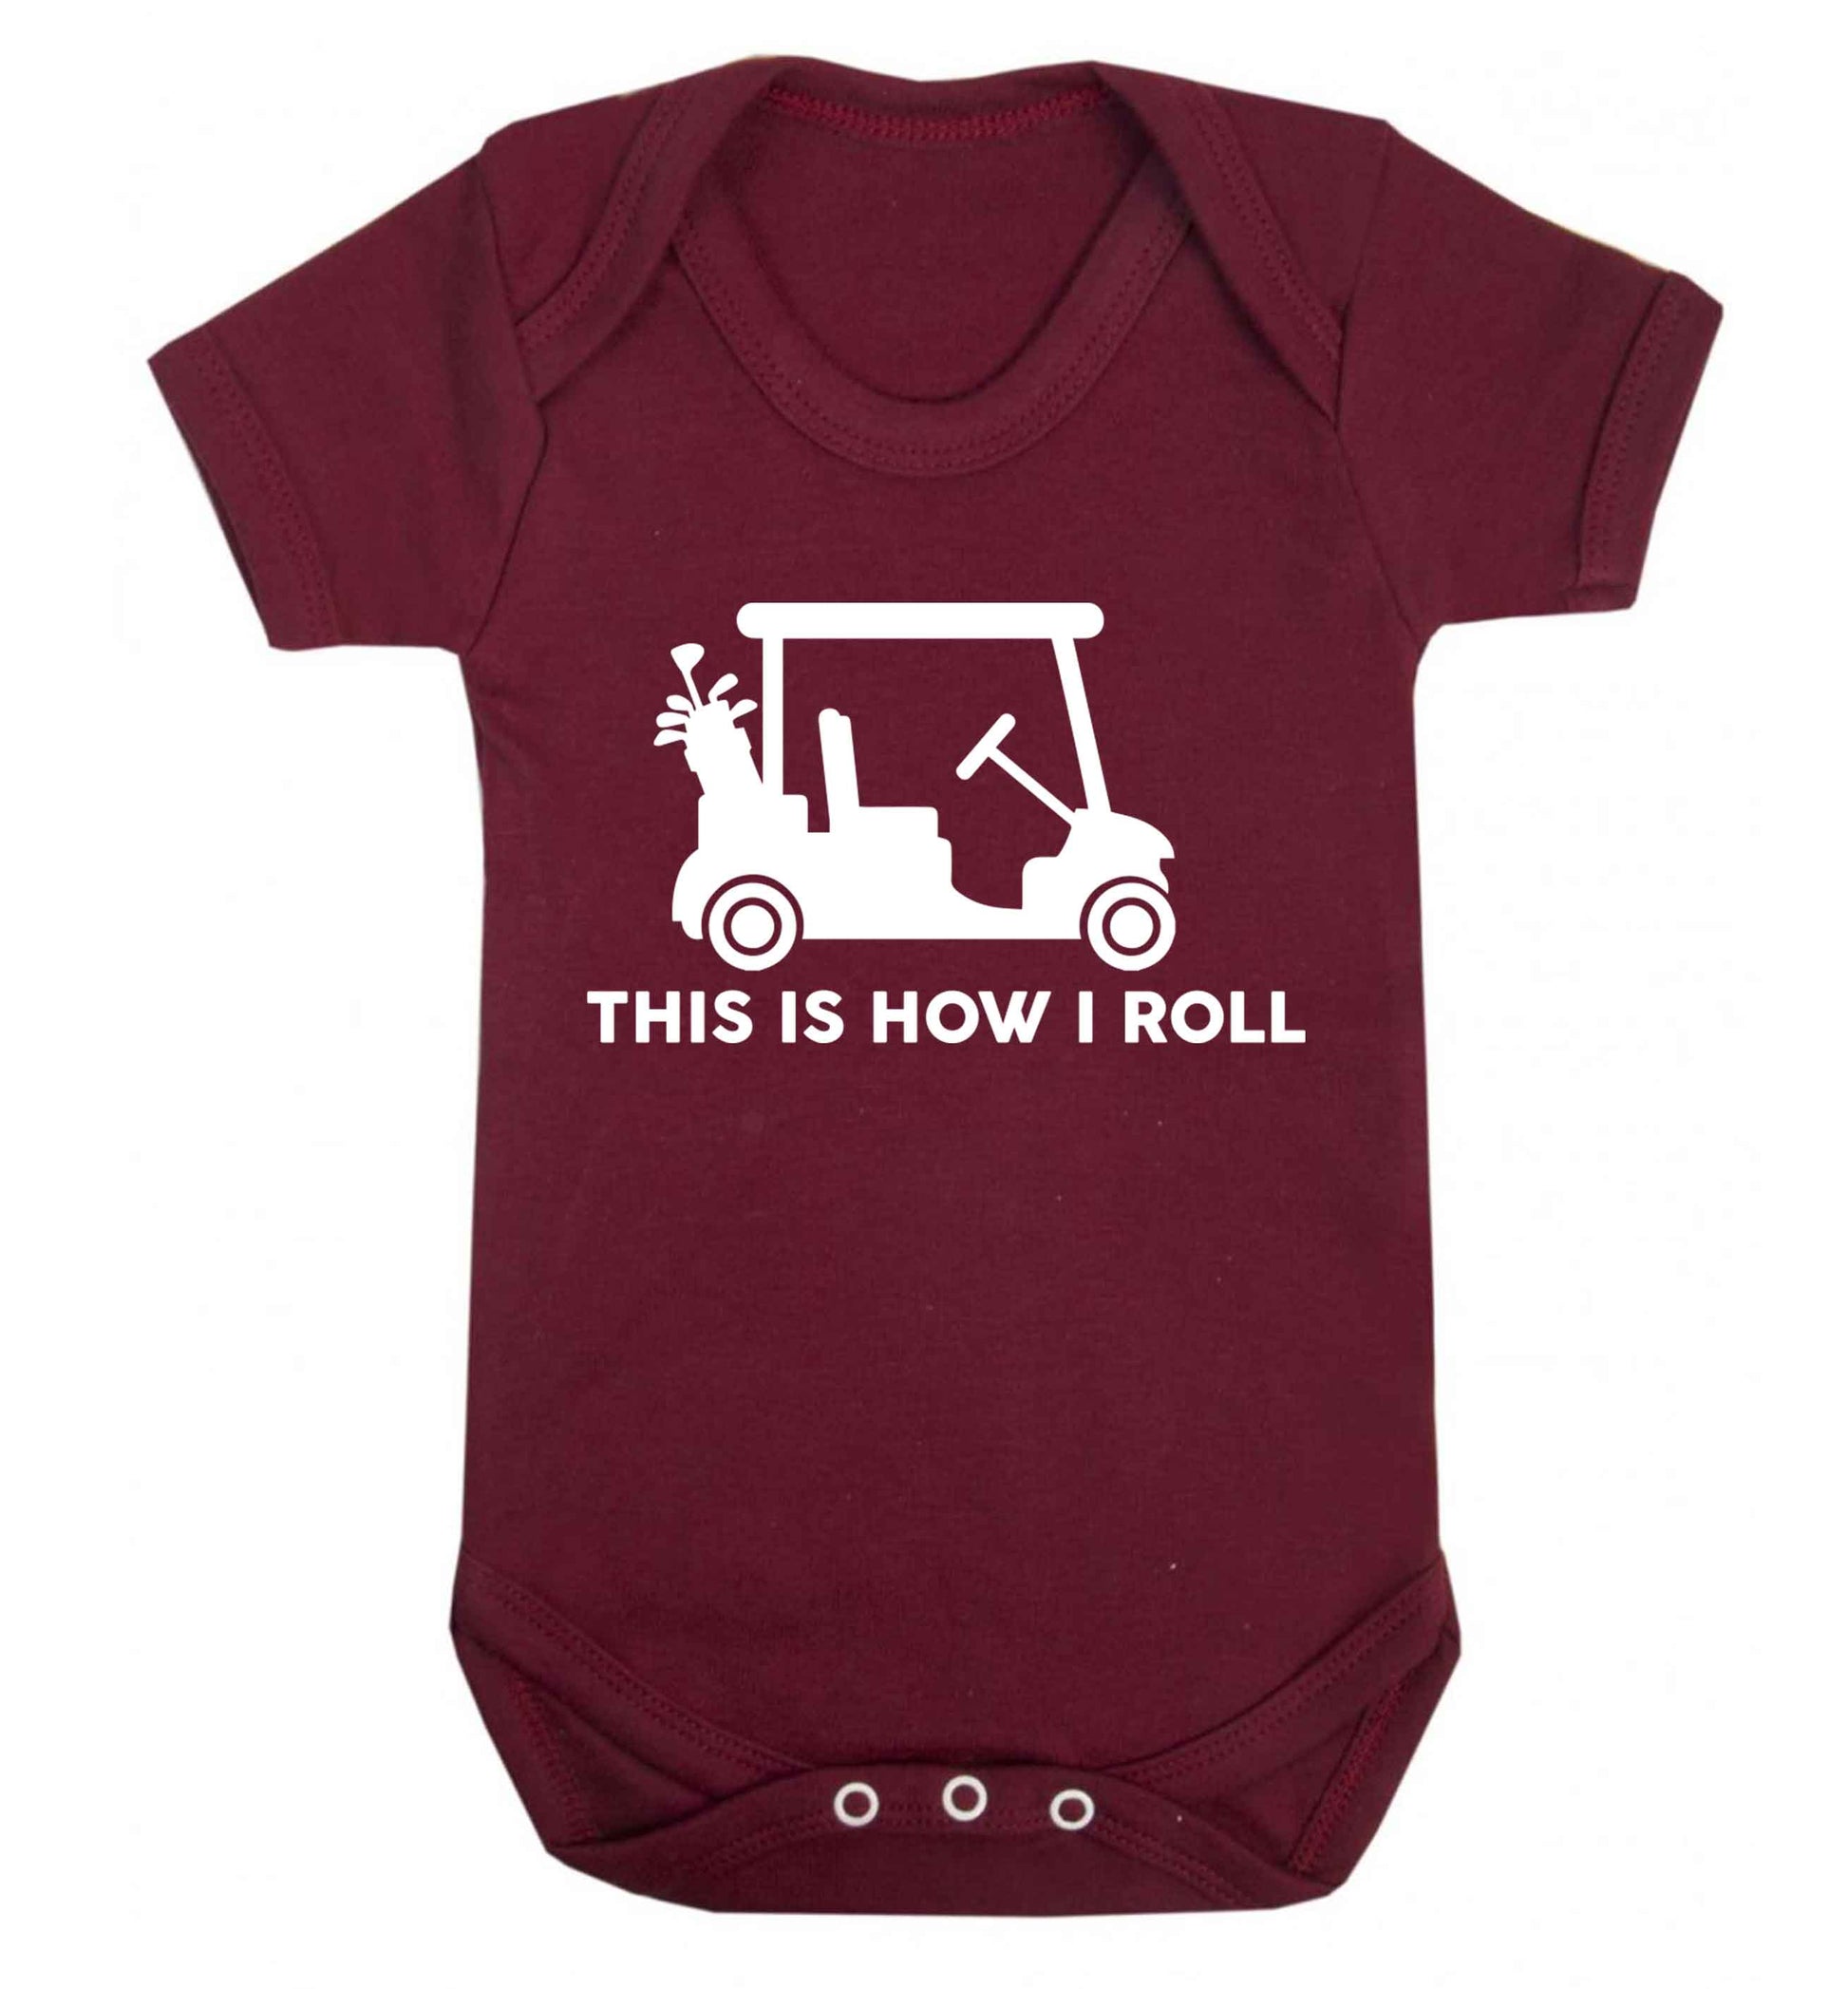 This is how I roll golf cart Baby Vest maroon 18-24 months